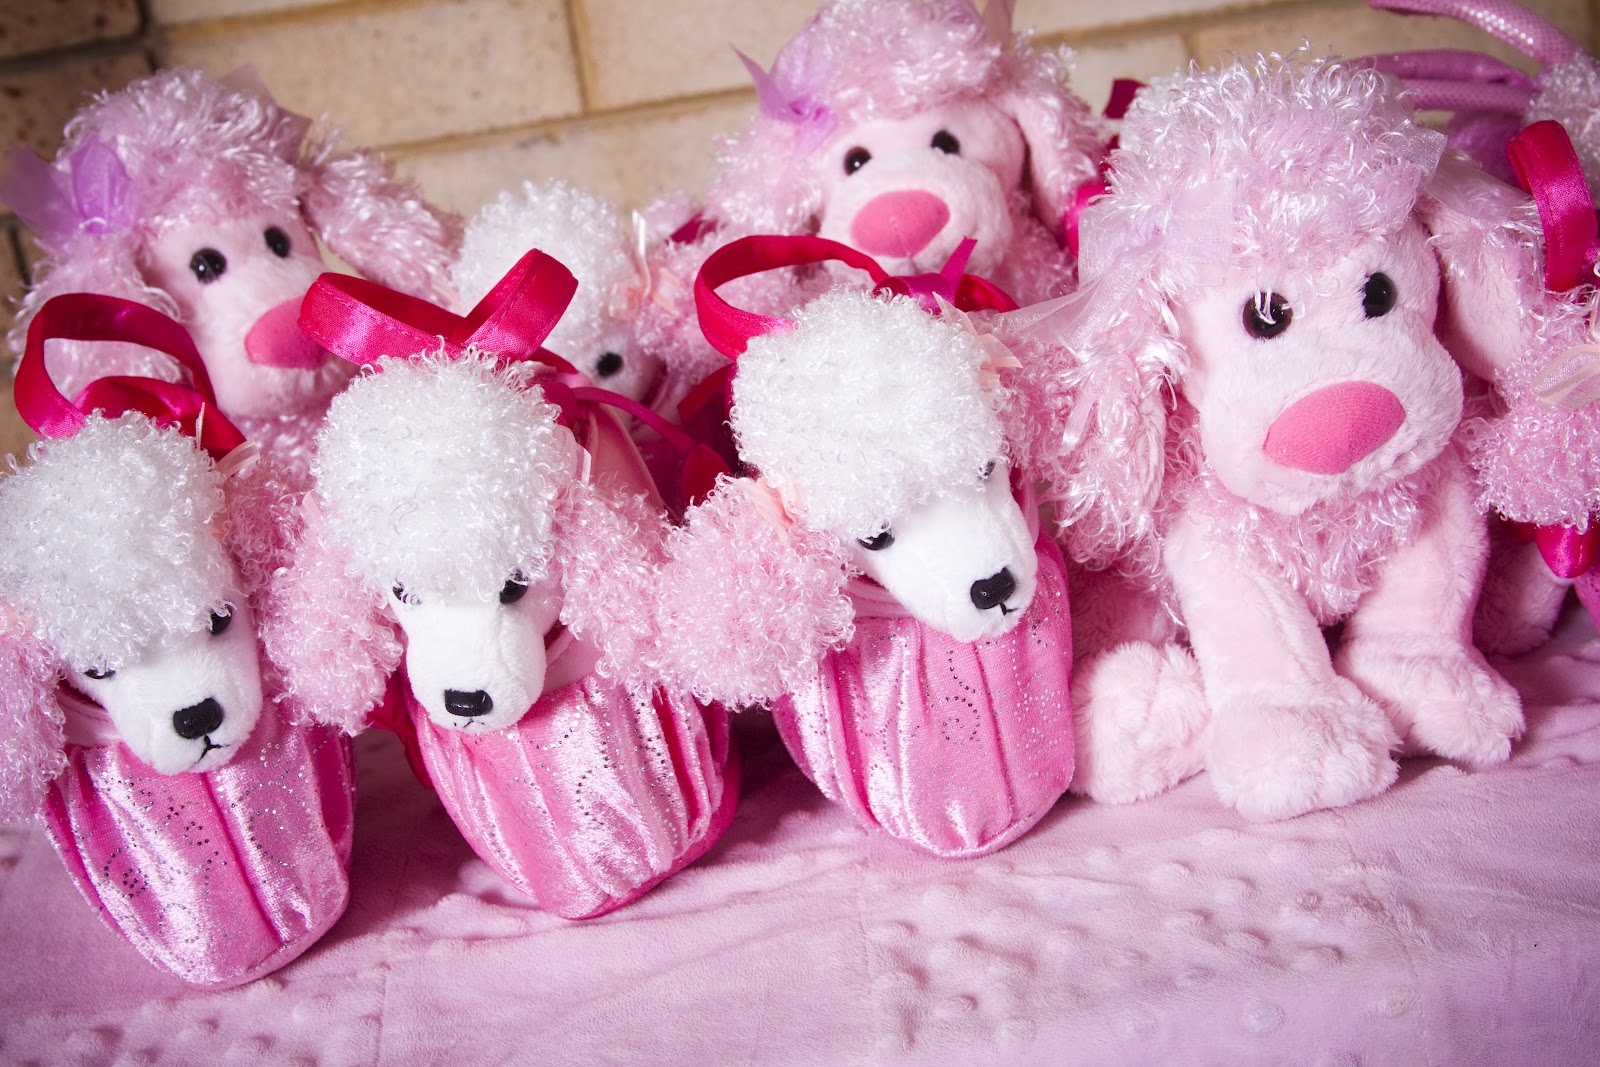 Cute Dogs Pink Poodle Dog